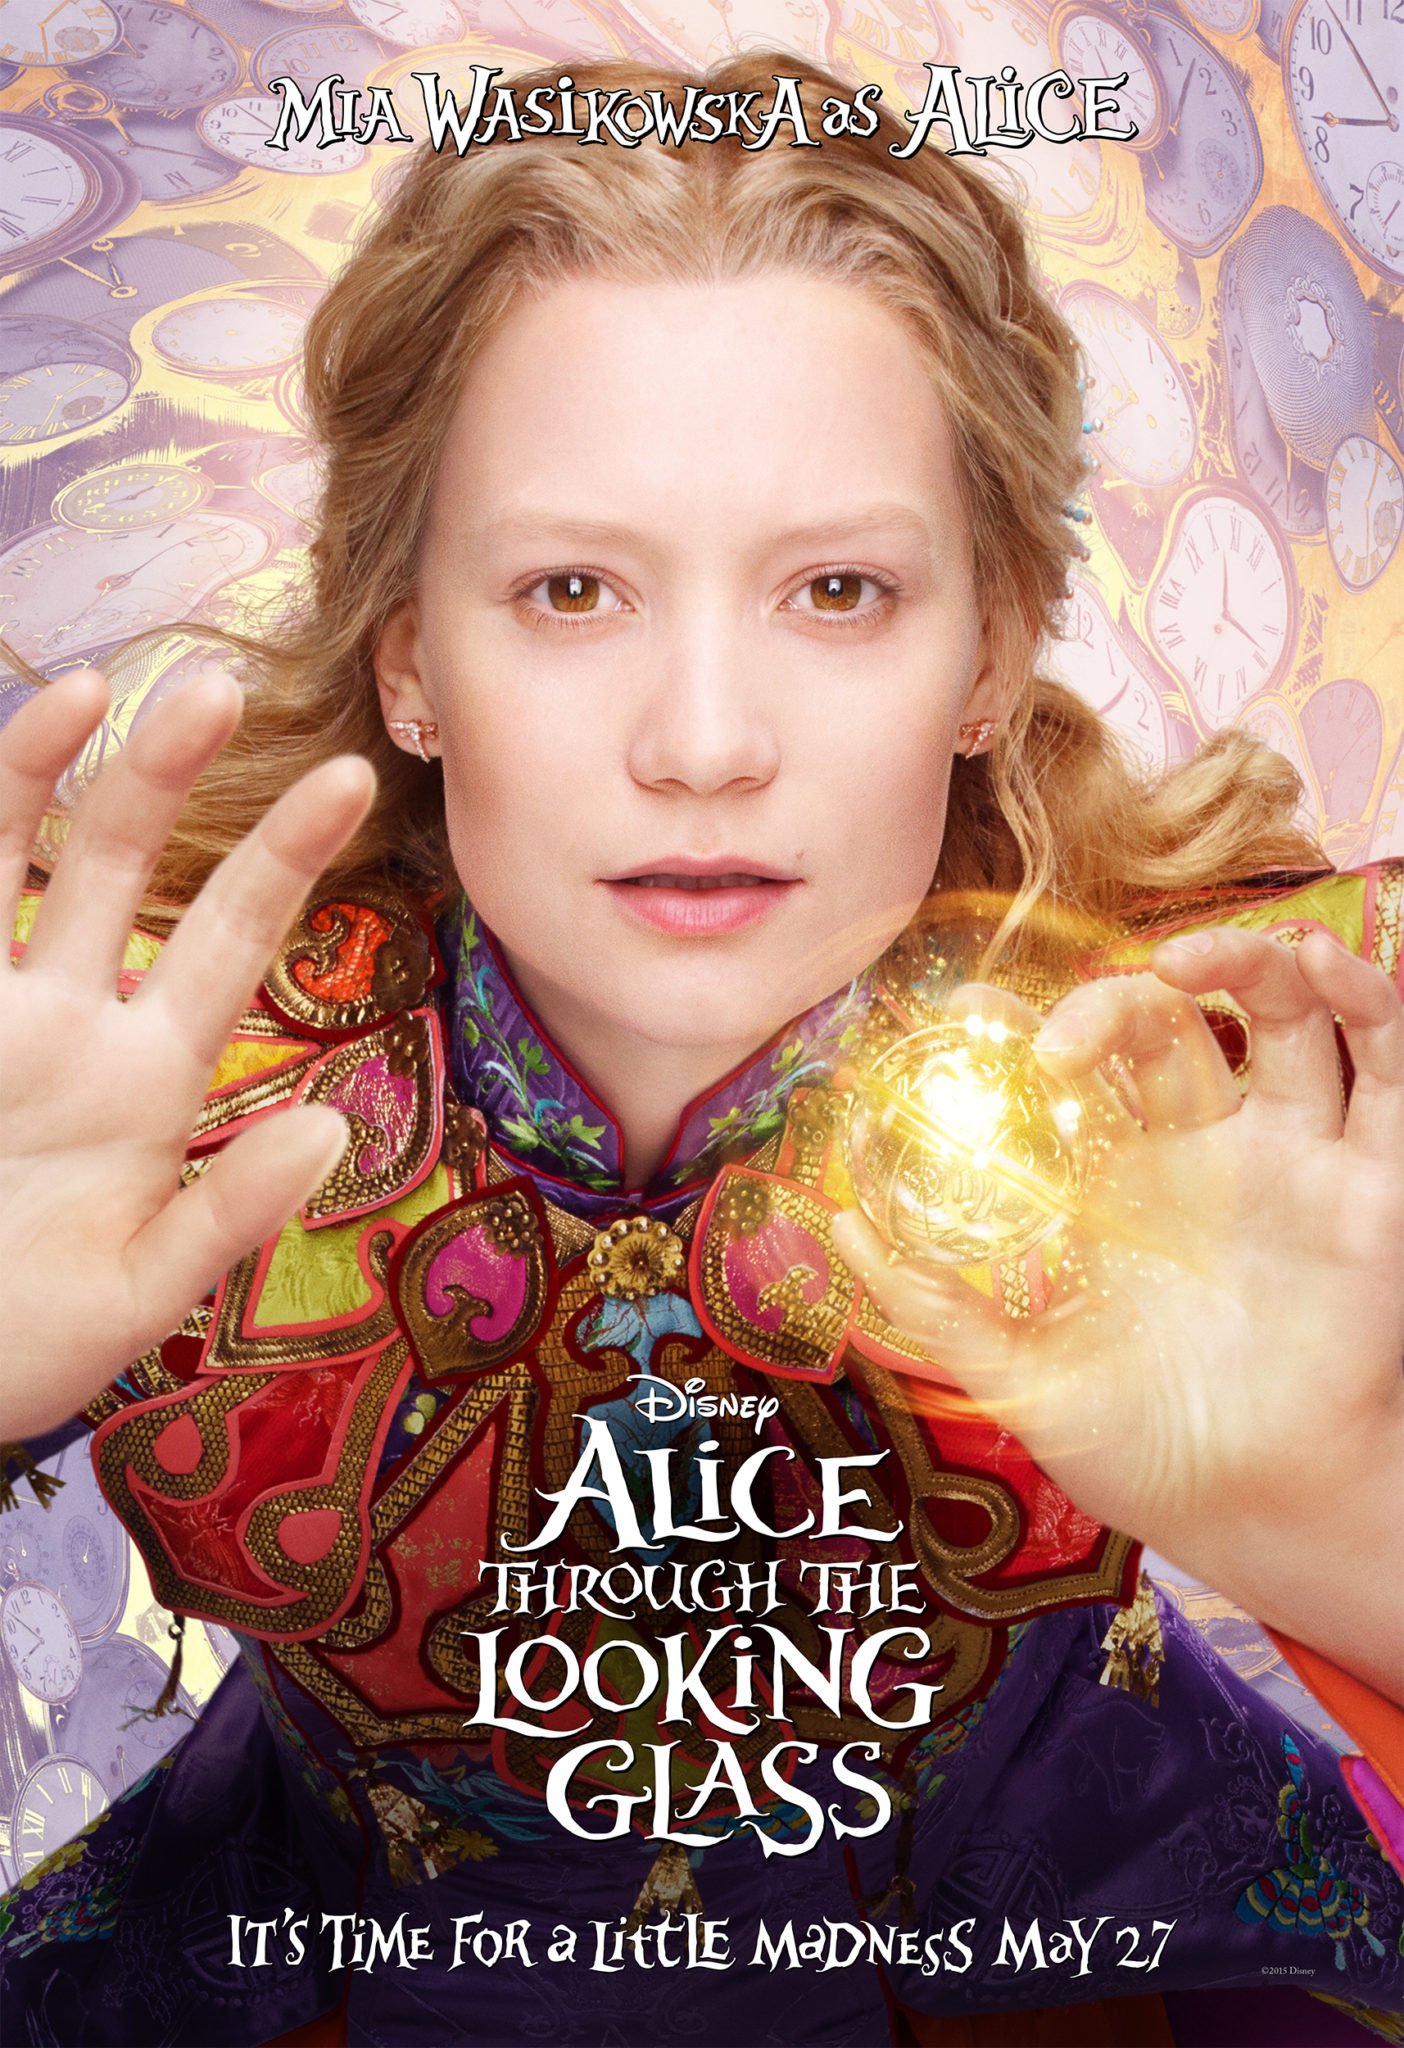 https://www.talkingwithtami.com/wp-content/uploads/2016/03/AliceThroughTheLookingGlass56426a58135f4.jpg